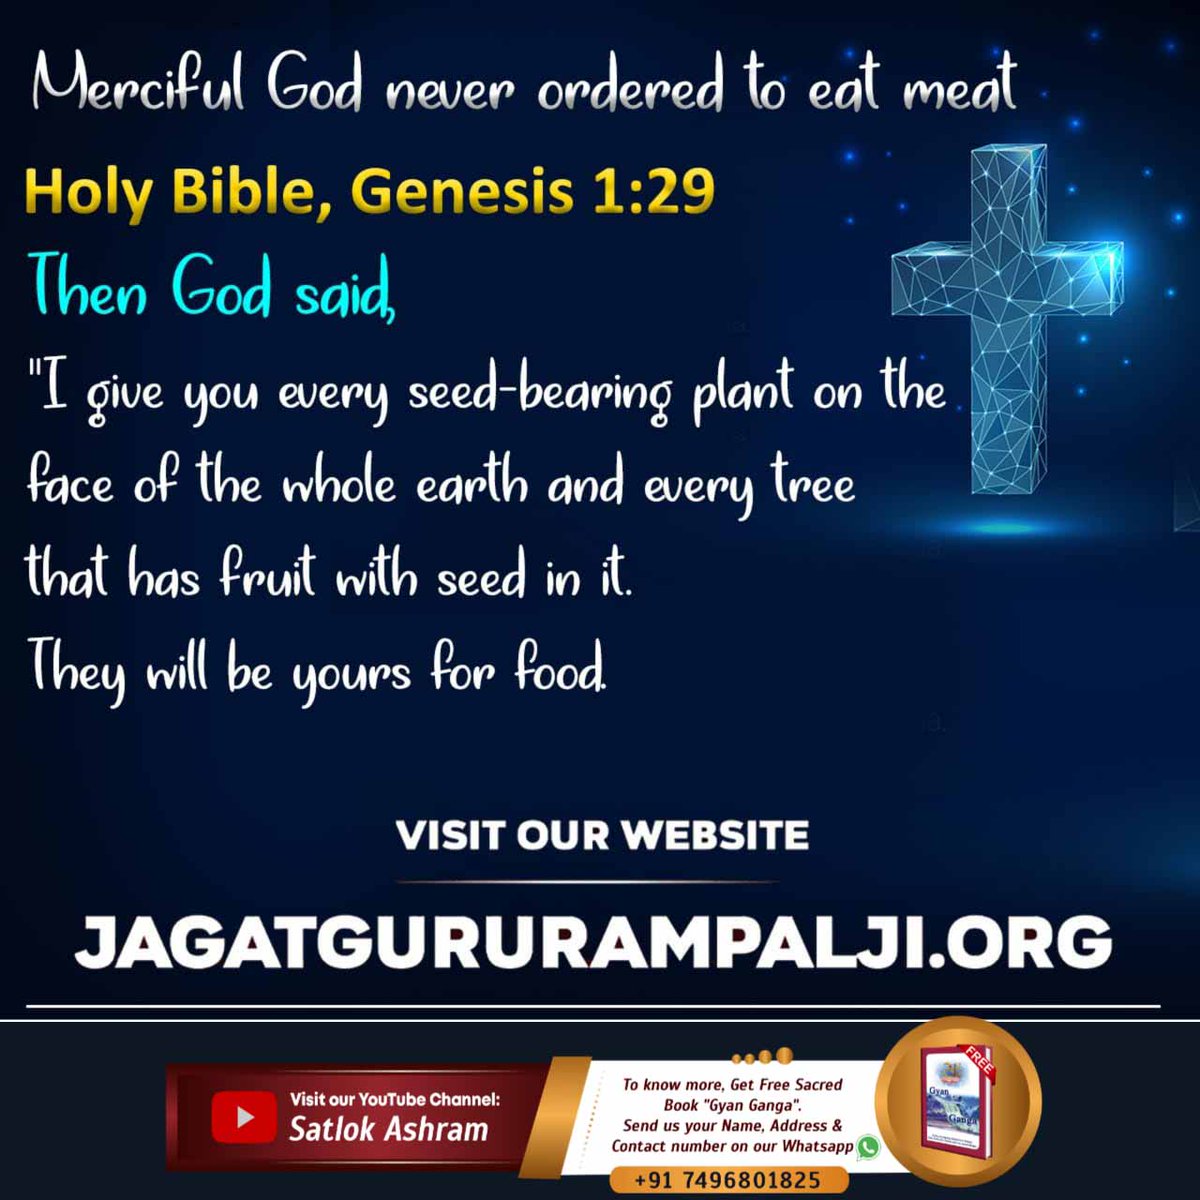 #TrueStoryOfJesus Jesus was the son of God Luke 1:35 Therefore the child to be born will be called holy- the Son of God. Lord Kabir is the eternal father of all souls. He never dies nor He takes birth from a mother. God Kabir only is worthy of being worshipped.